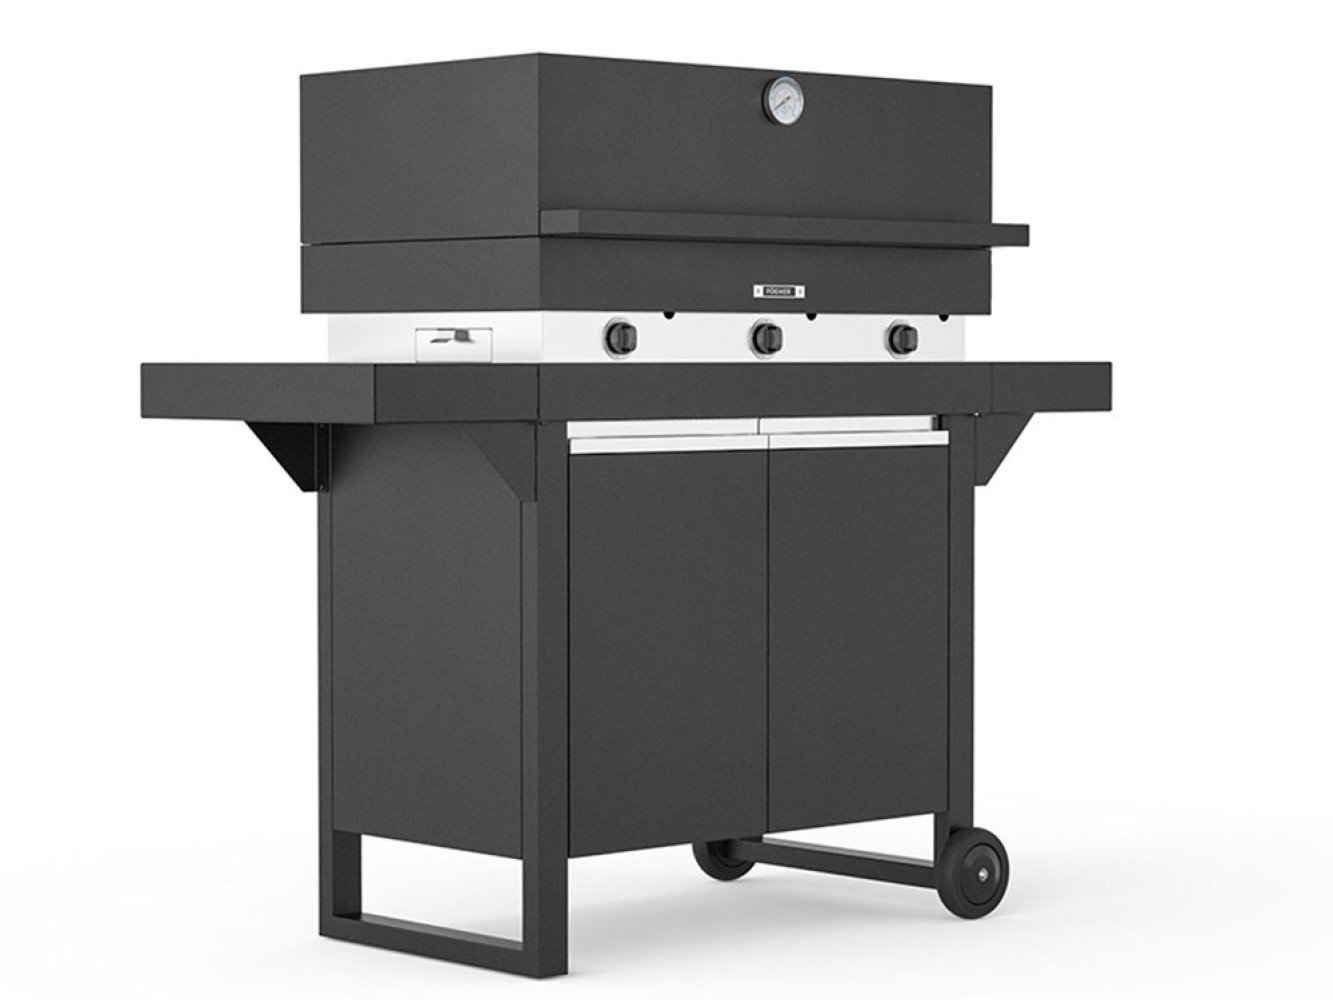 Fògher Gas Barbecue with Oven FGA 750 FO with Closed Trolley